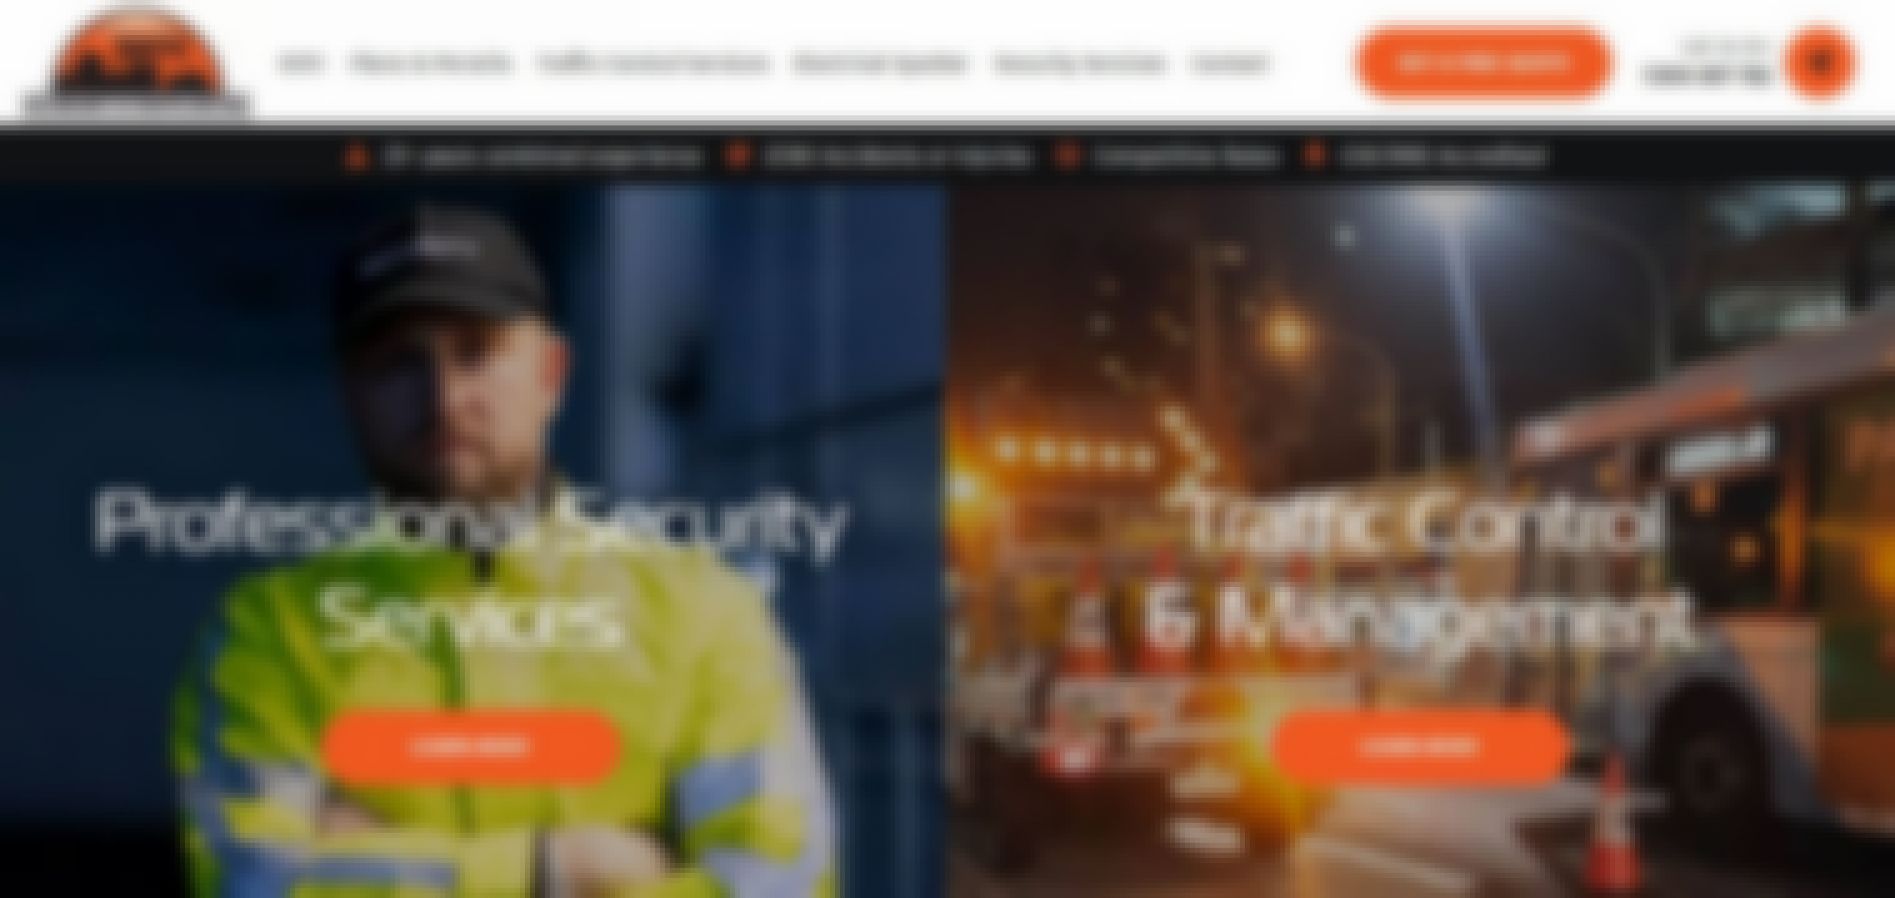 site security & traffic control security guard company sydney